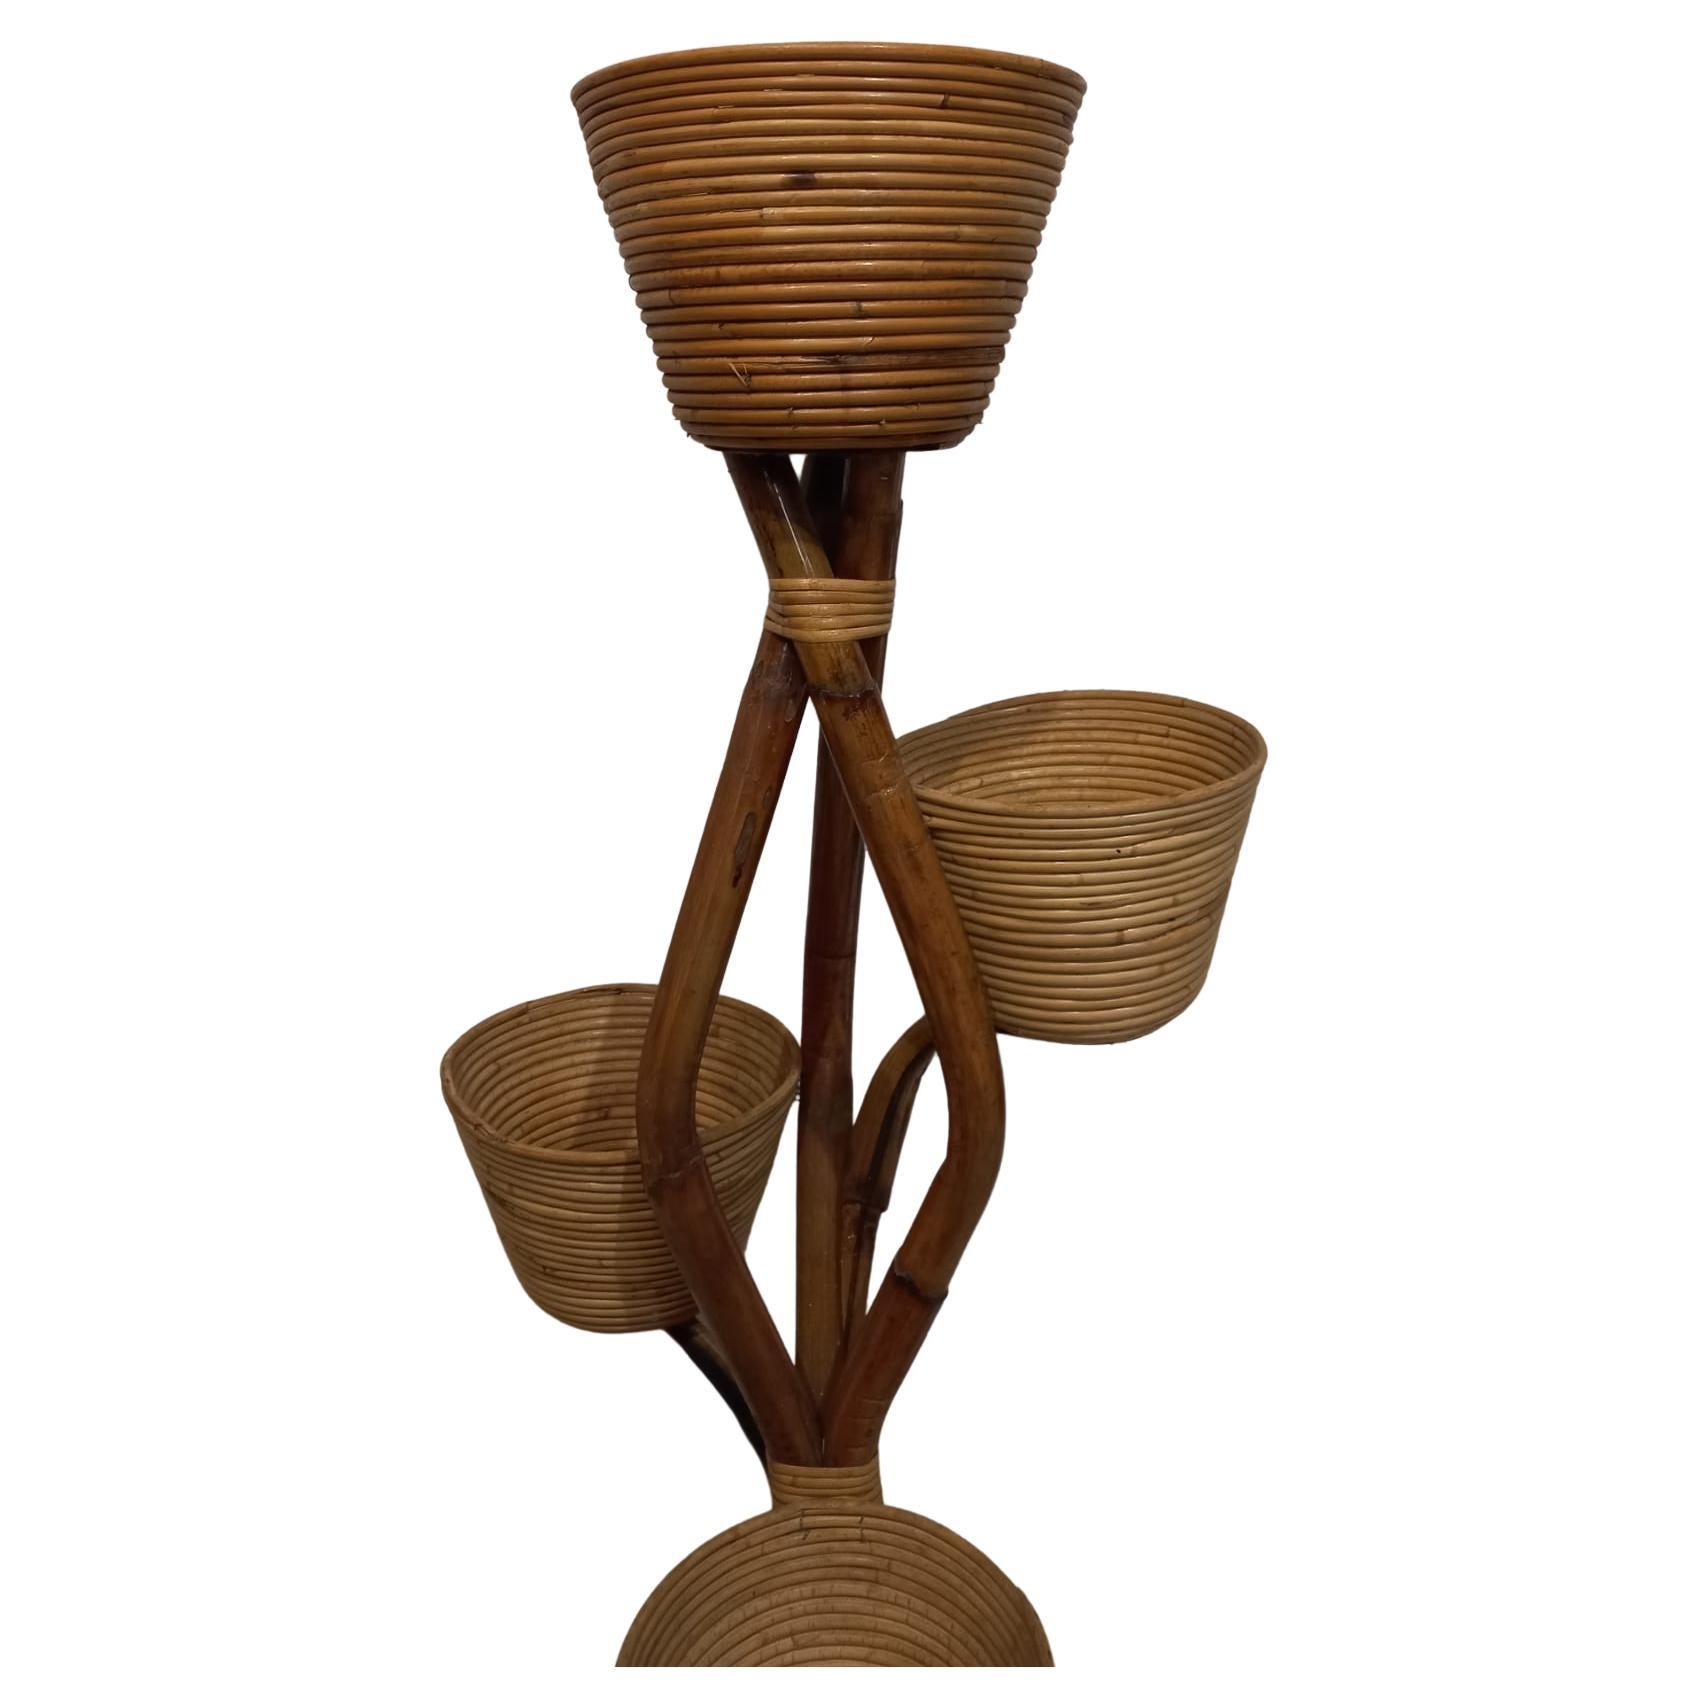 1960s vintage bamboo and rattan flower stand from Italy For Sale 2